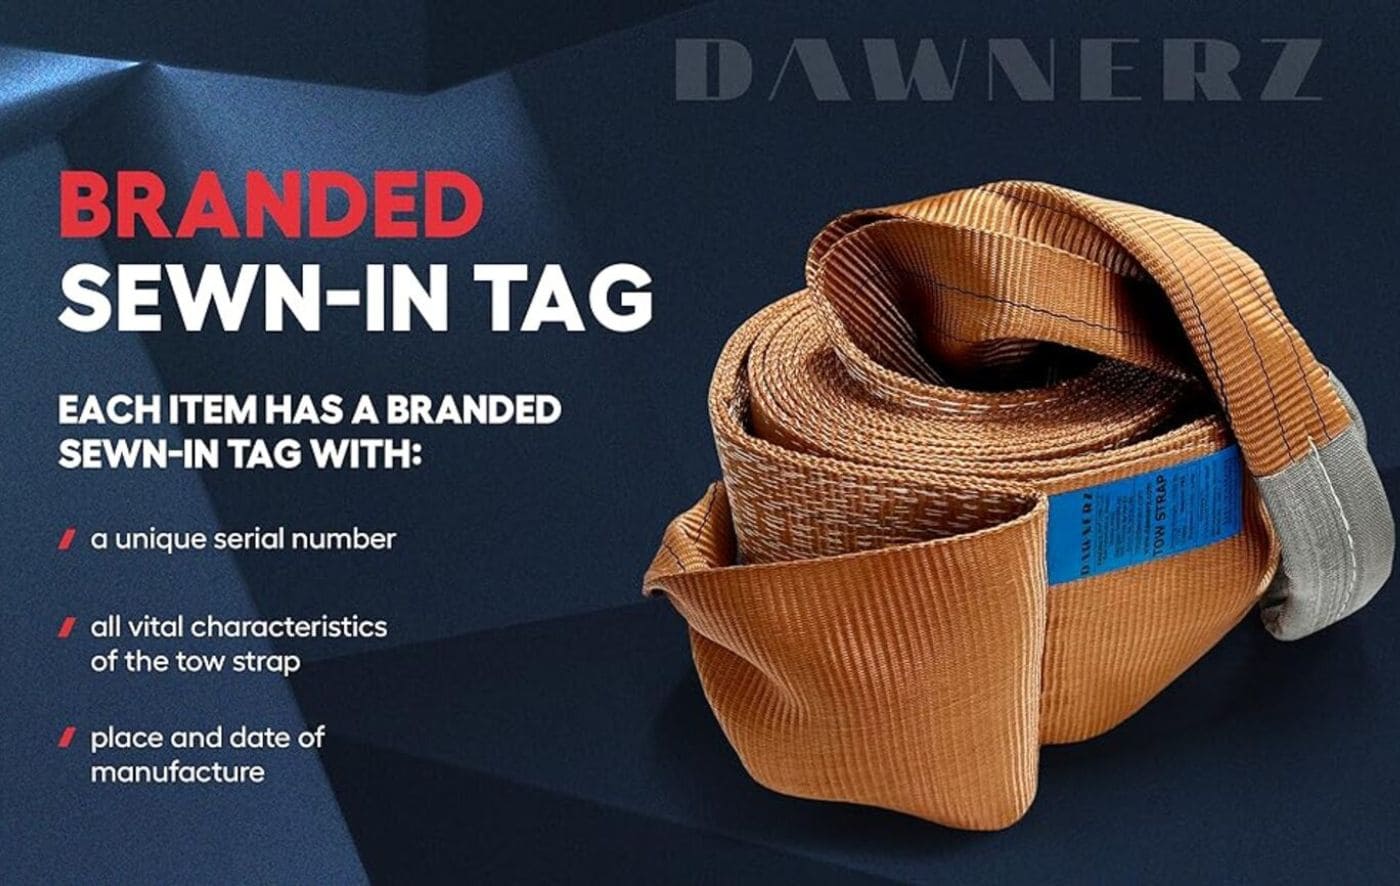 Dawnerz Heavy Duty Tow Strap for Tractors